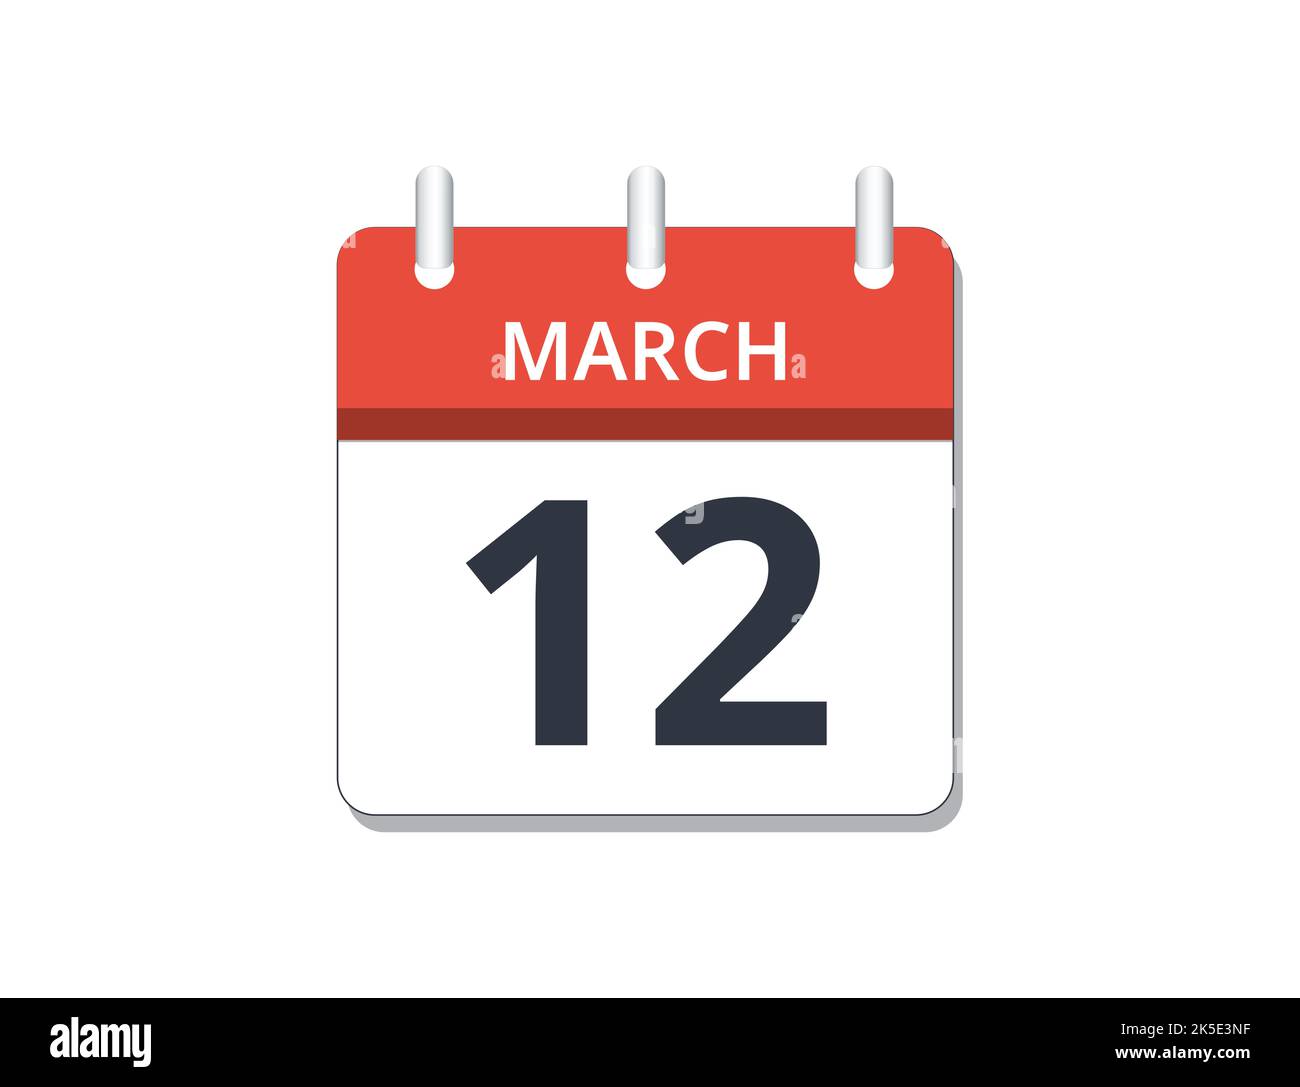 March, 12th calendar icon vector. Concept of schedule, business and tasks Stock Vector